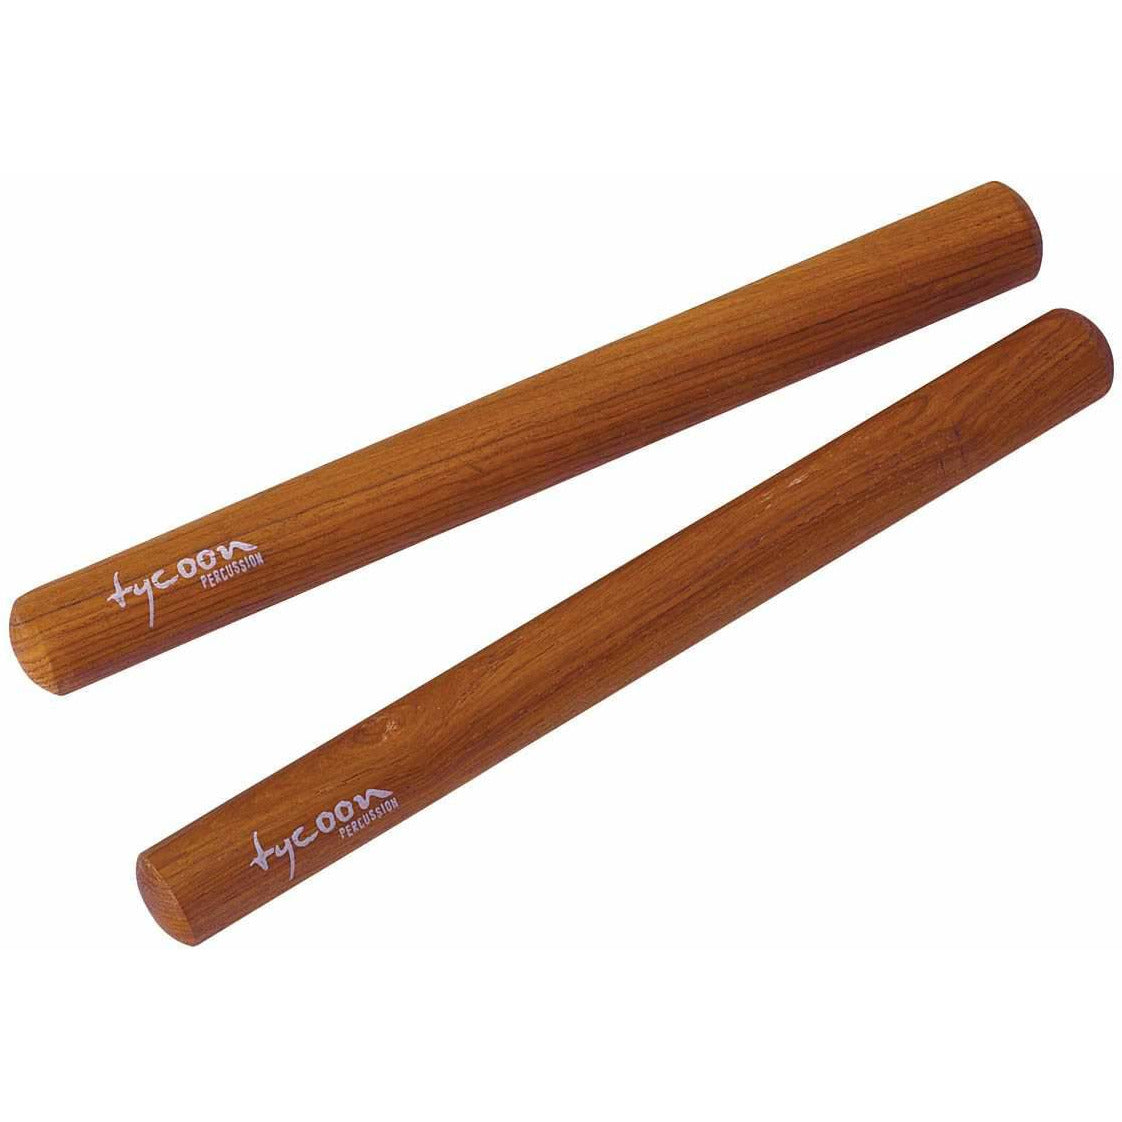 Tycoon, Tycoon Percussion 10" Hardwood Claves